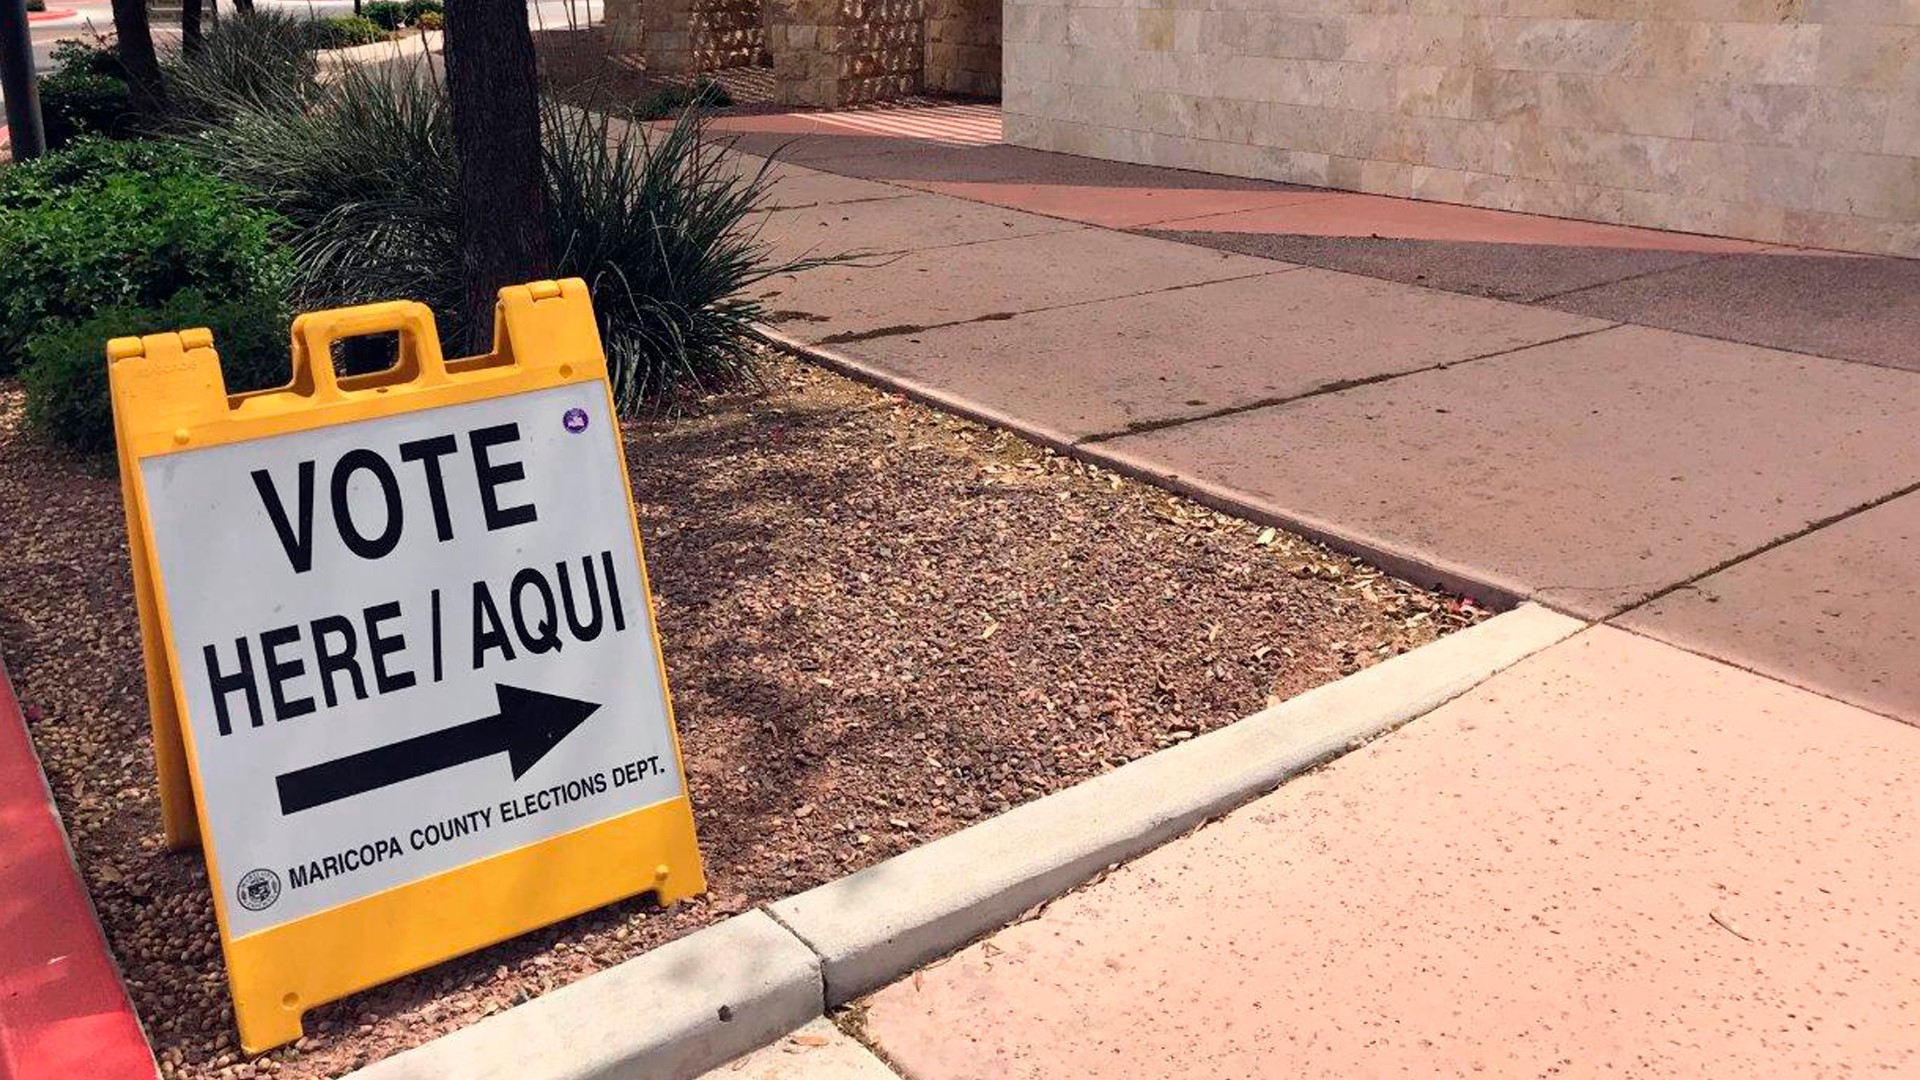 Maricopa County's top elections official says some hard decisions about November's election needs to be made now to keep people safe.